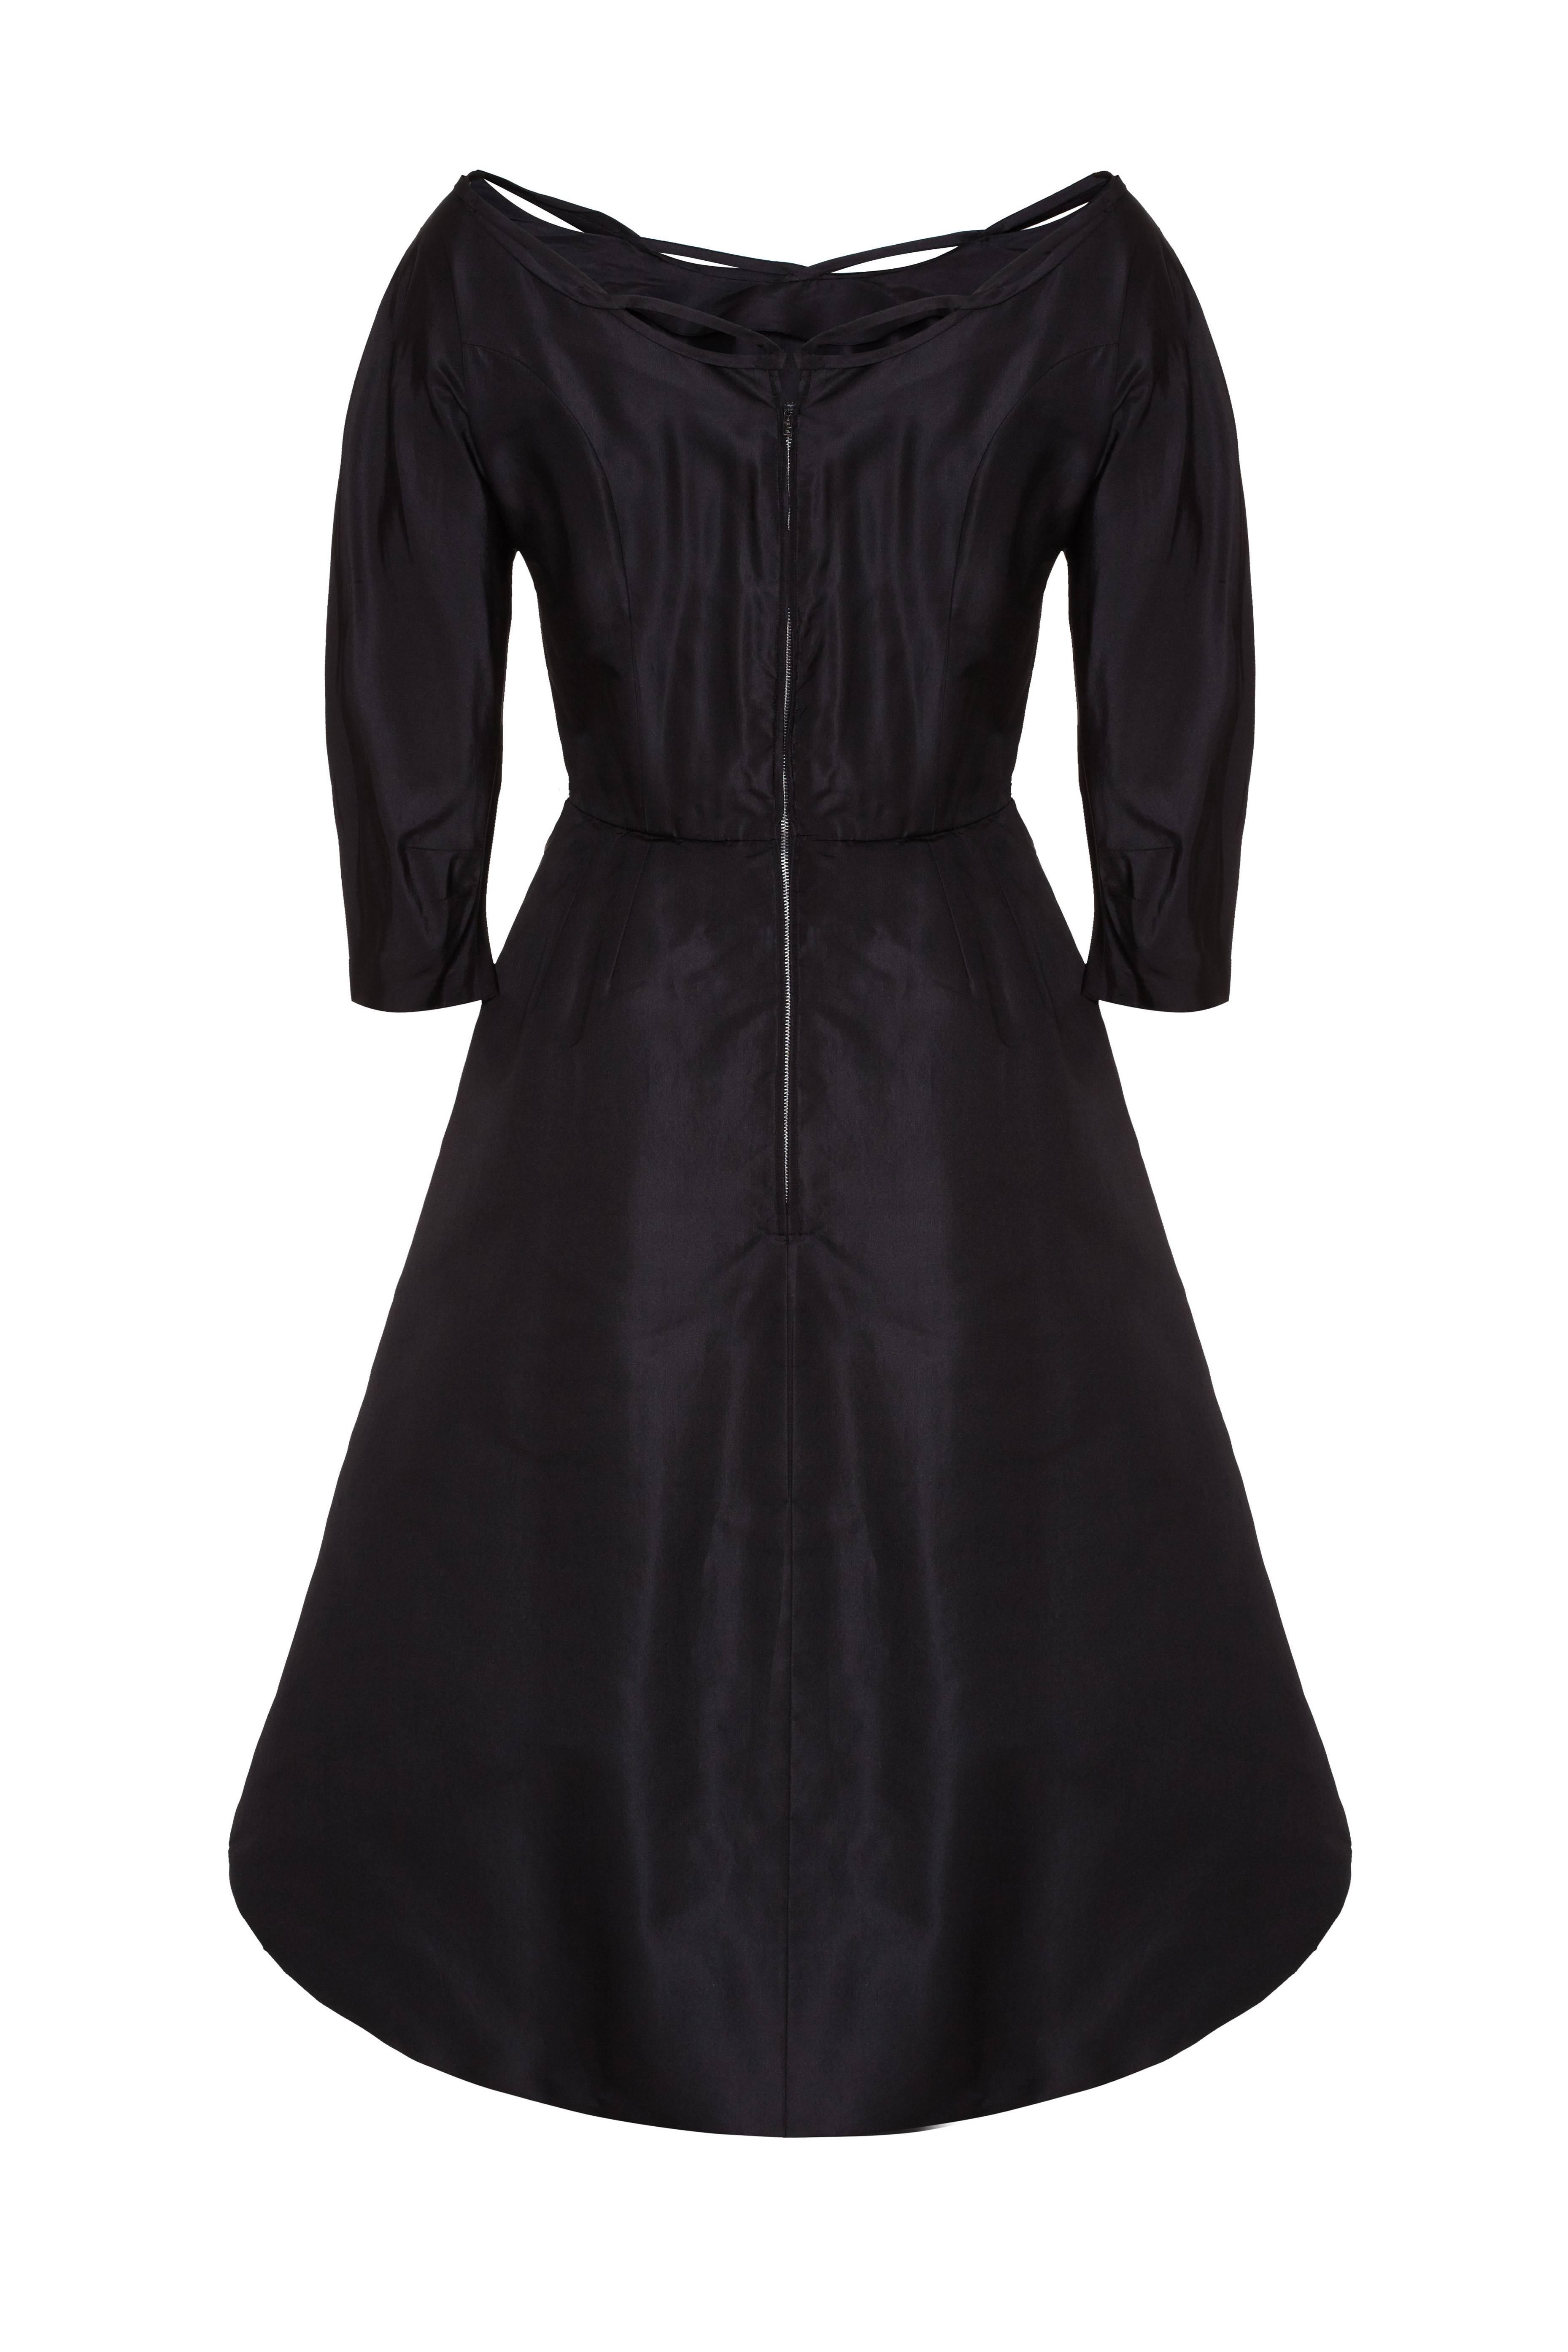 This late 1940s or early 1950s black taffeta silk dress is by internationally acclaimed American designer Ceil Chapman and of complex construction.  The dress has a beautiful fitted bodice with a boned internal waspie to shape the waist.  The